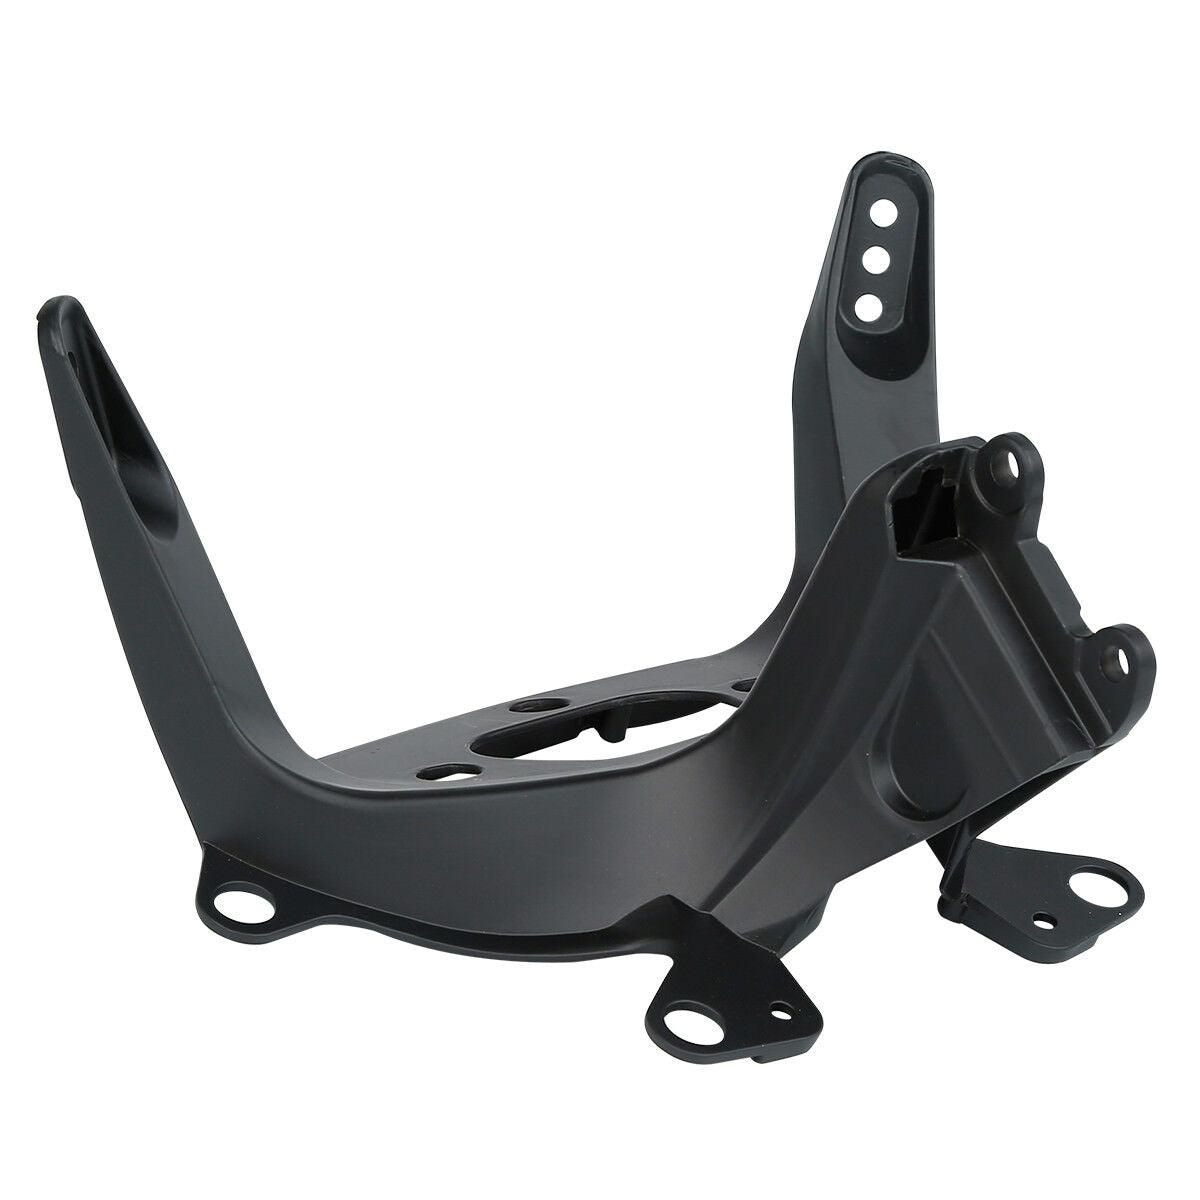 Front Upper Stay Headlight Fairing Bracket For Yamaha YZF R6 YZF-R6 2003-2005 04 - Moto Life Products